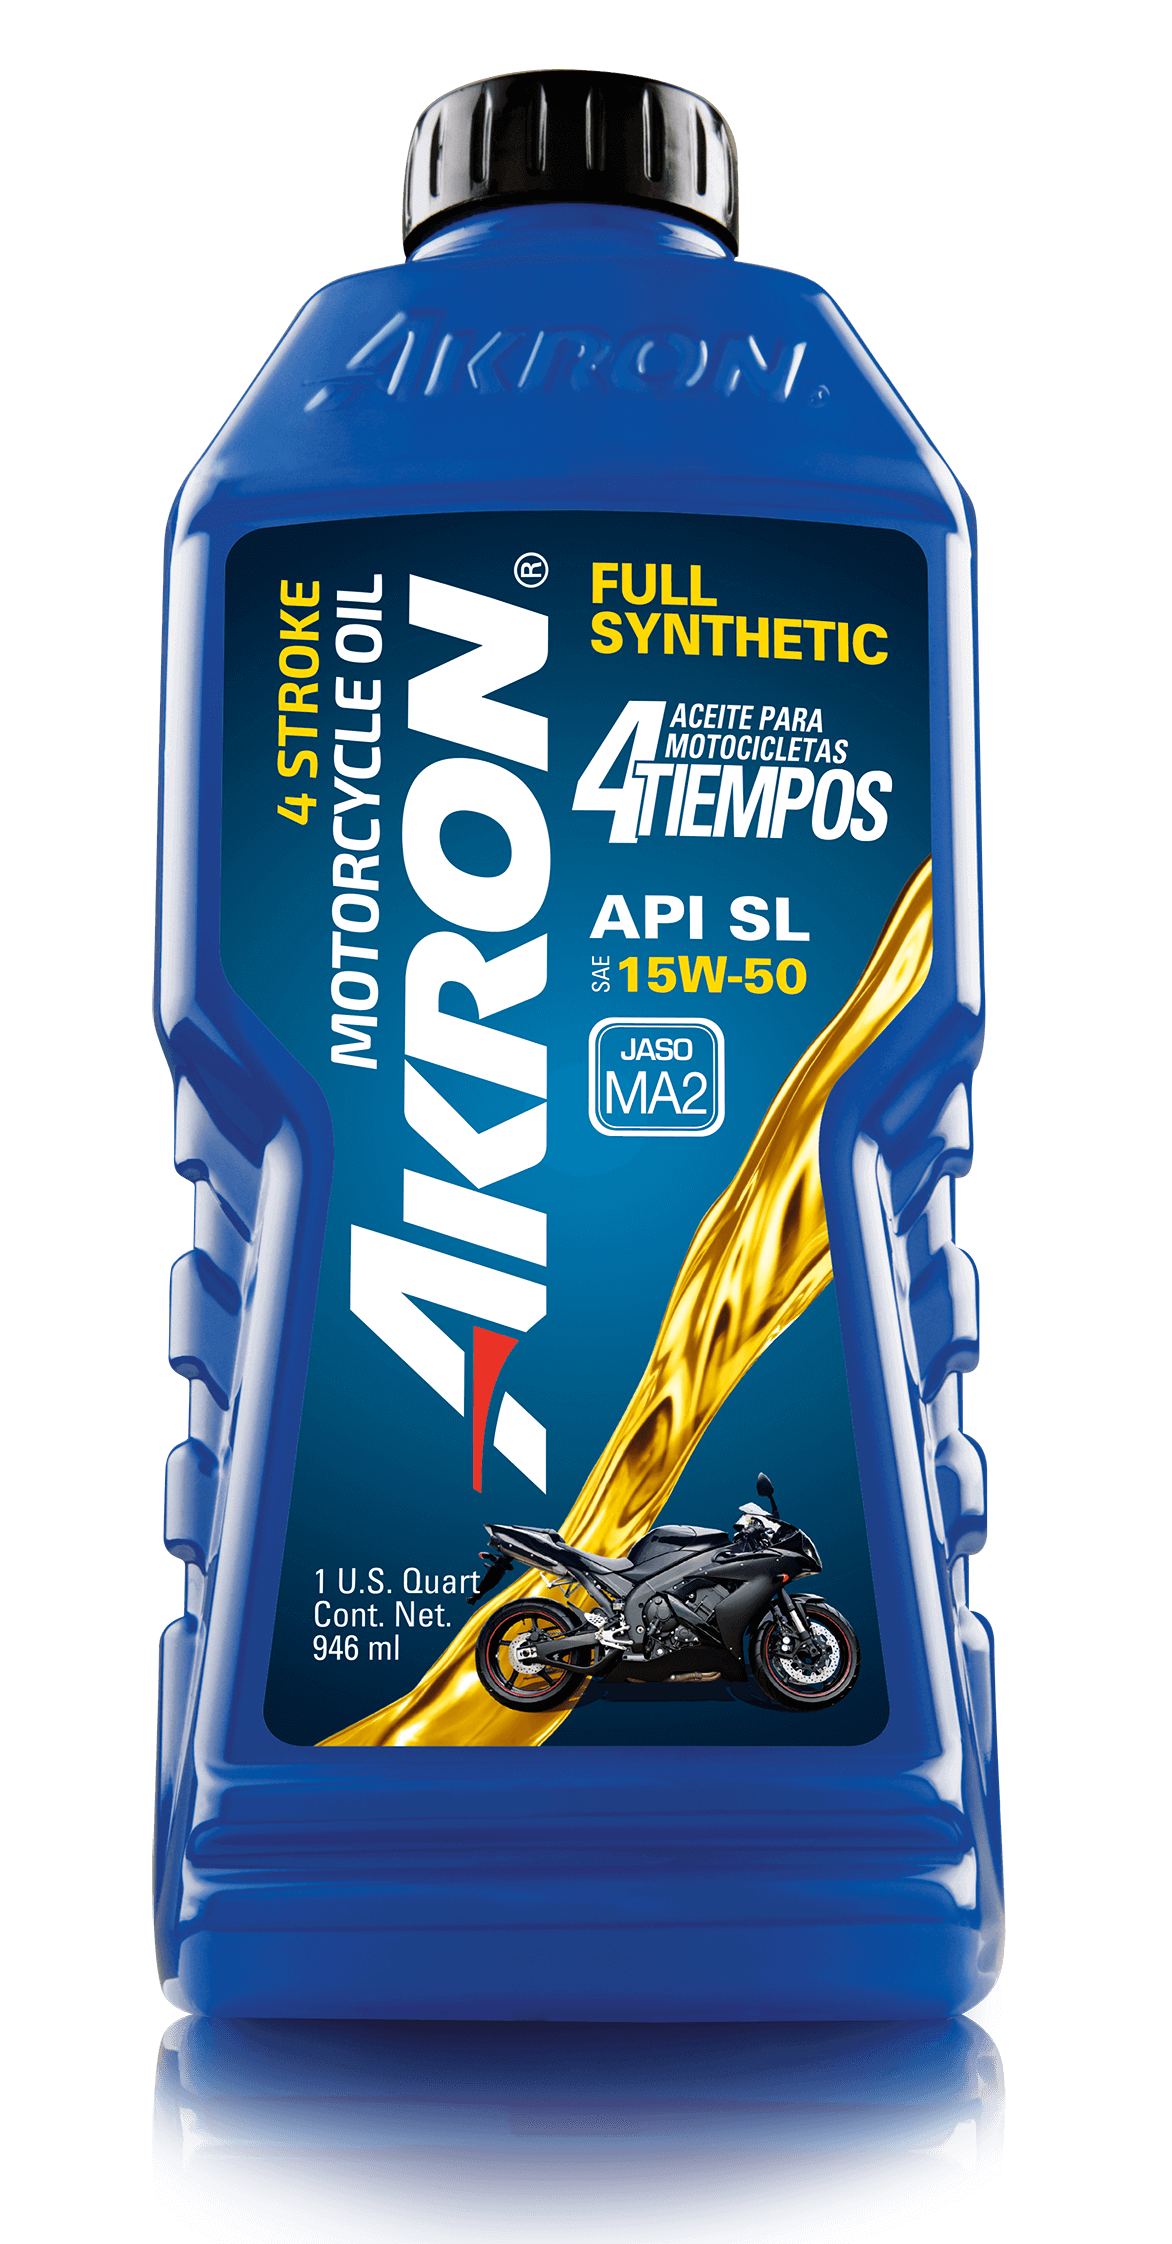 AKRON MOTORCYCLE FULL SYNTHETIC